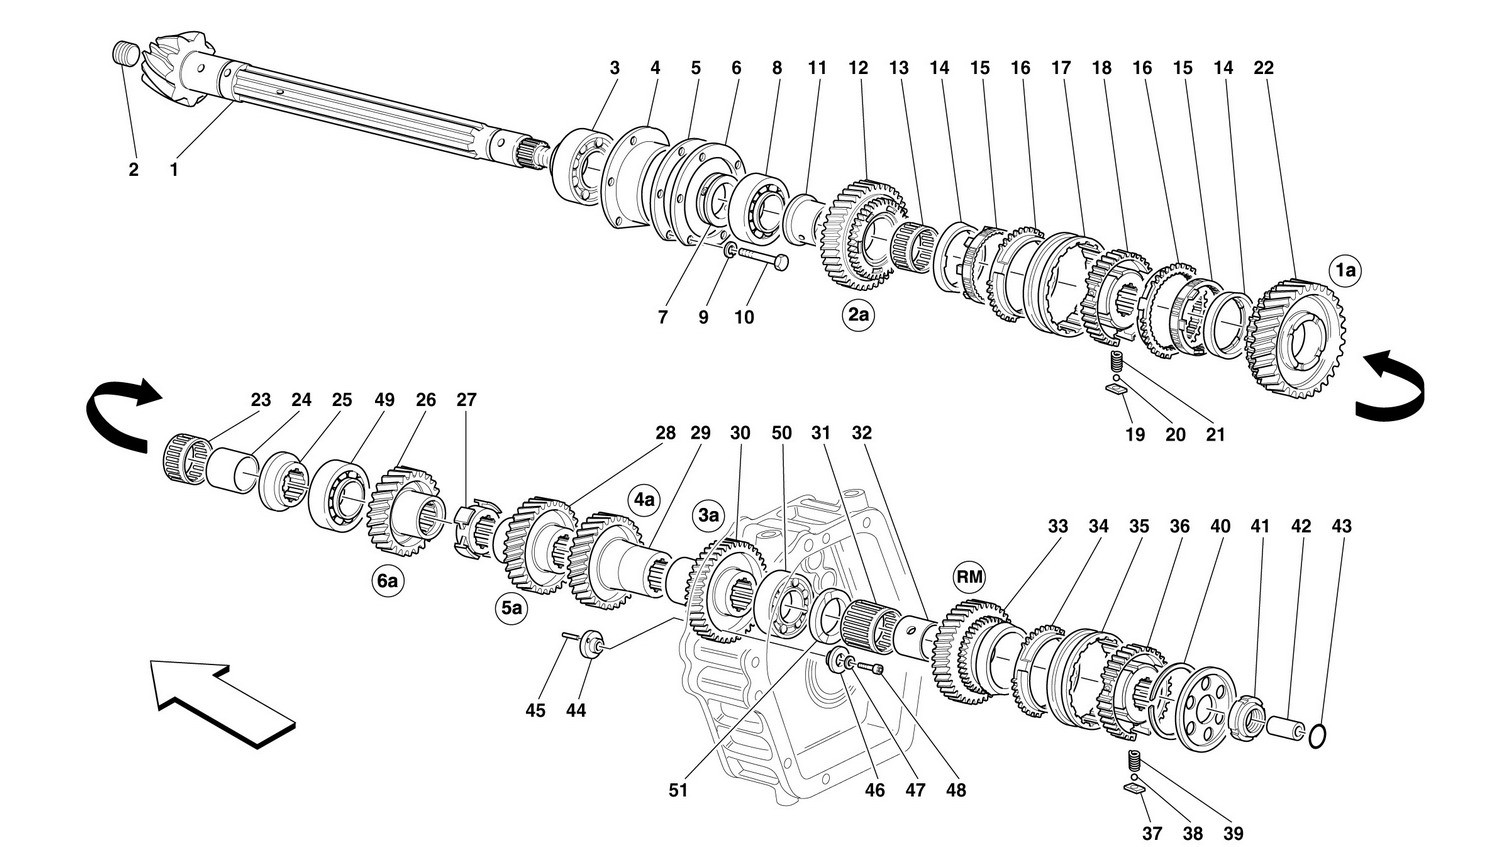 GEARBOX LAY SHAFT